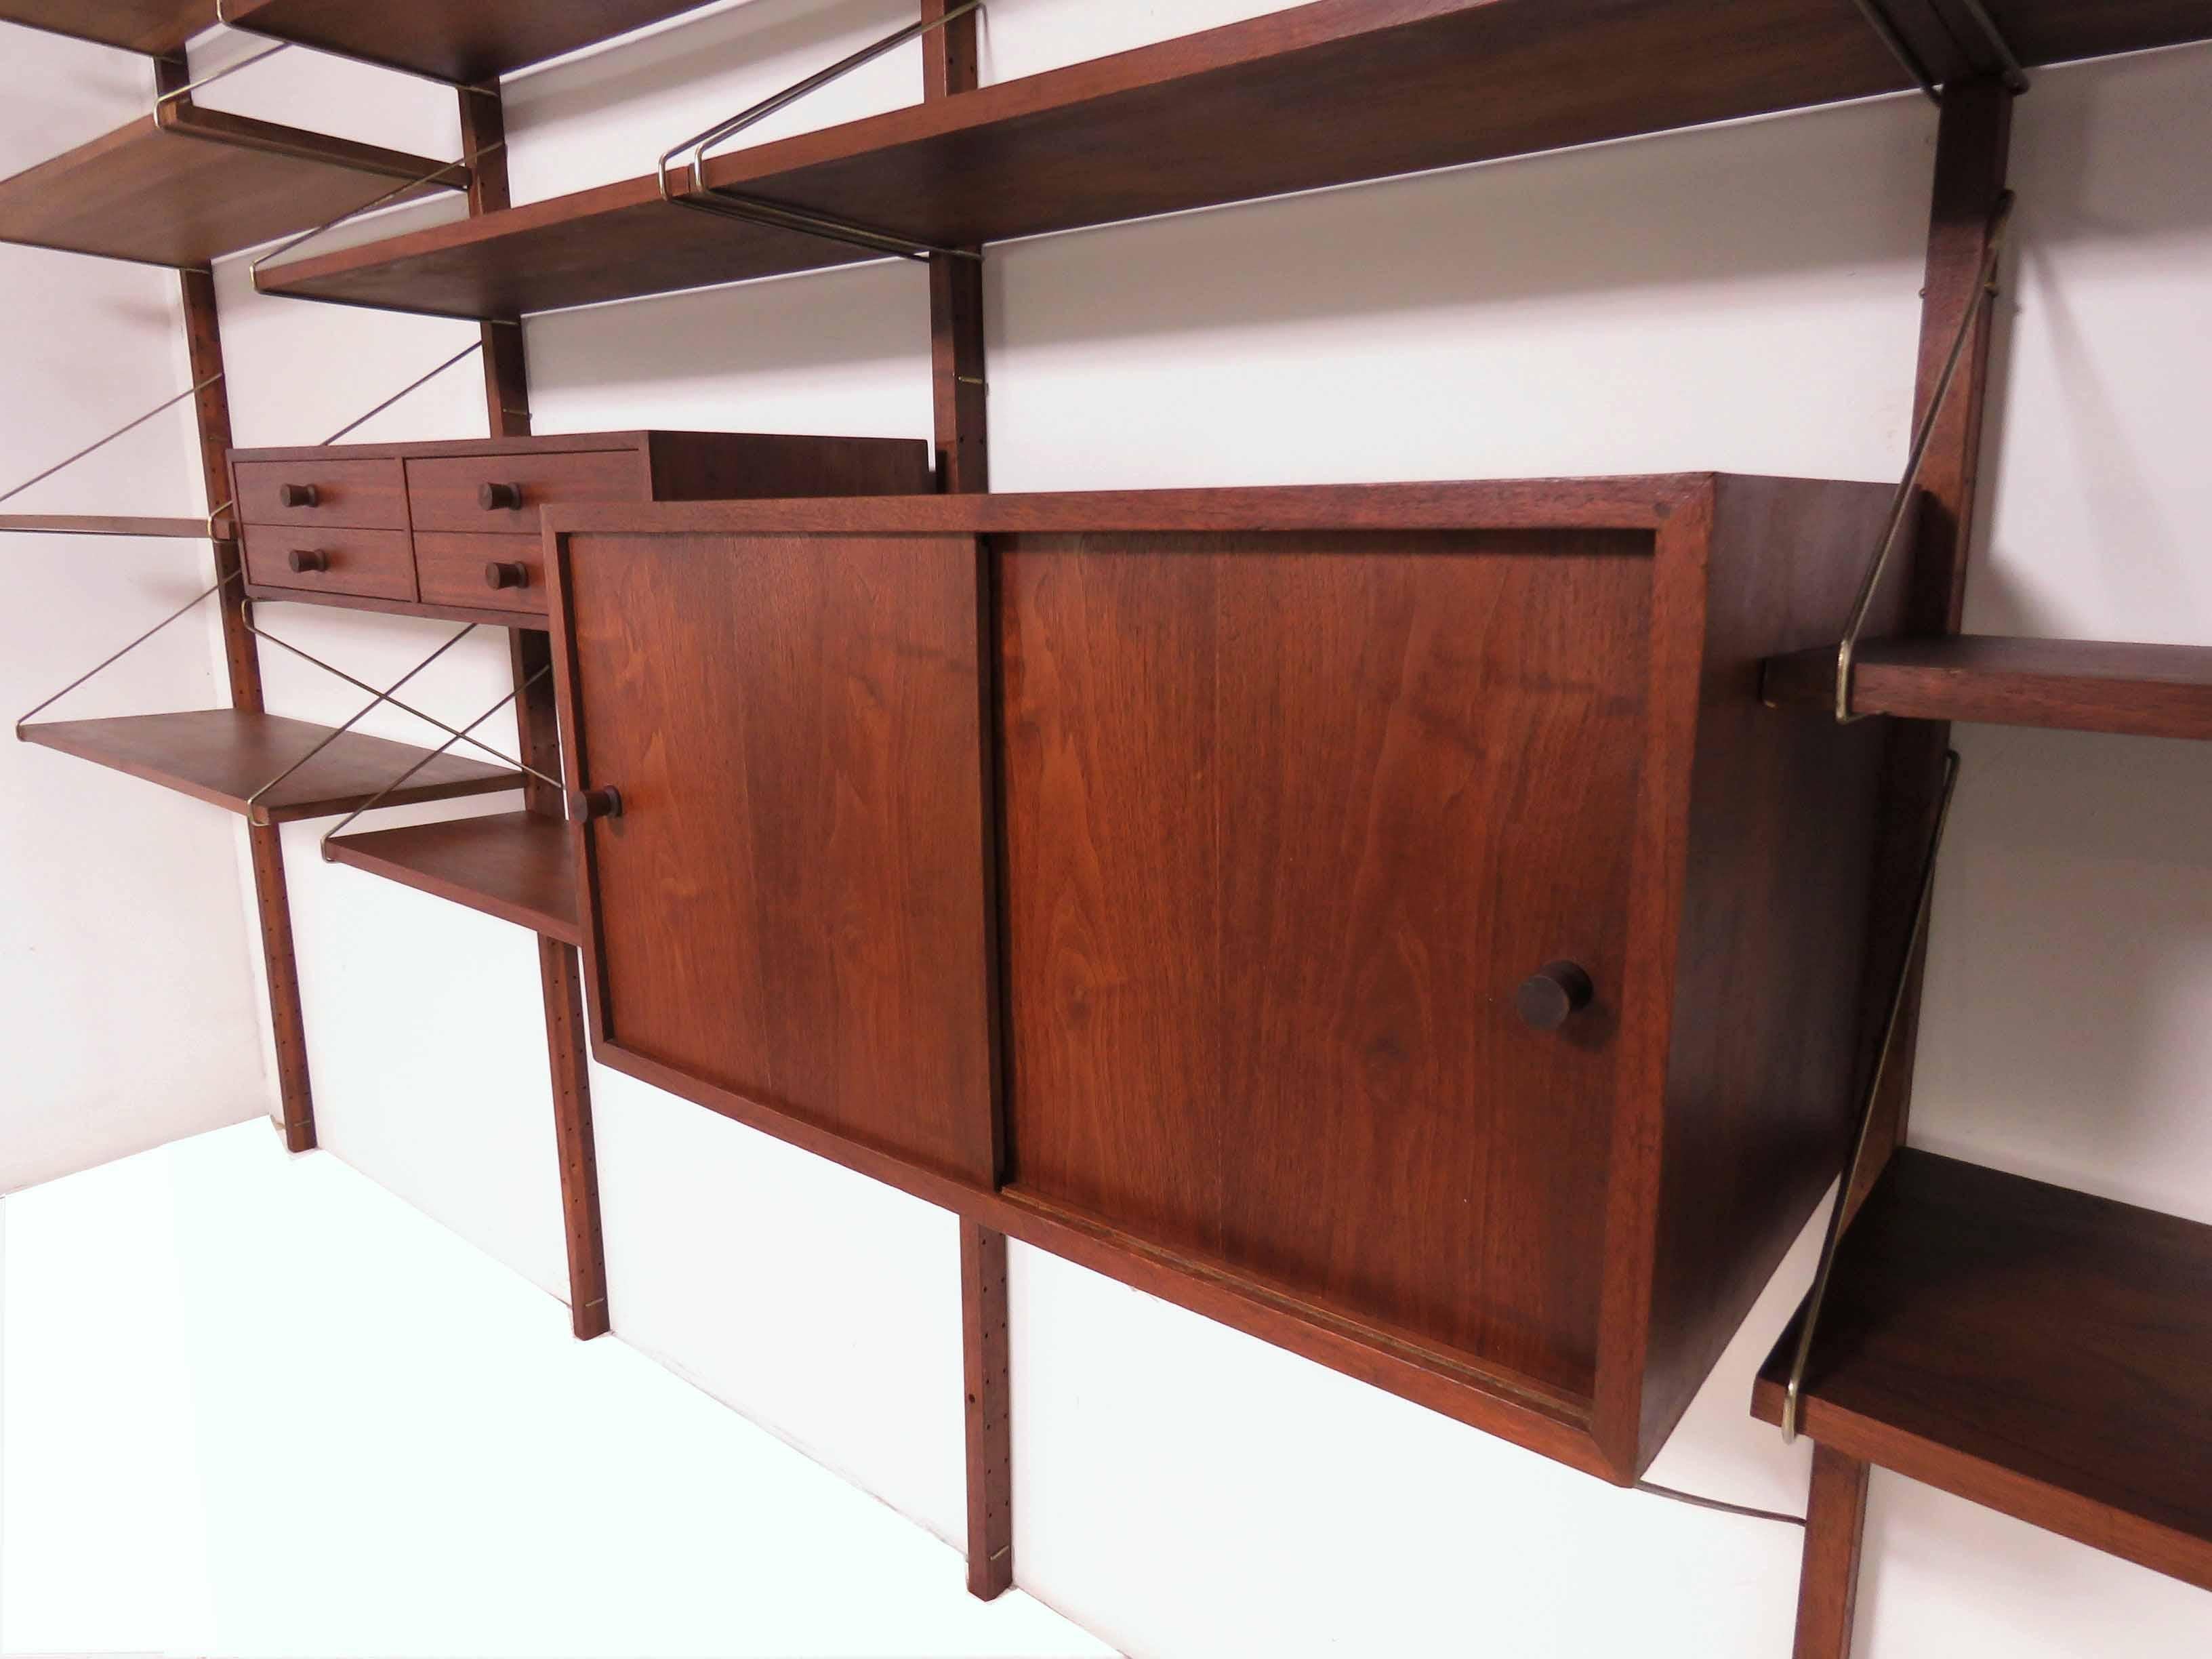 Midcentury wall-mounted shelving unit in walnut, circa 1960s. Four bay unit consists of a cabinet, drawer space and shelving. 

Overall, the wall unit measures 127